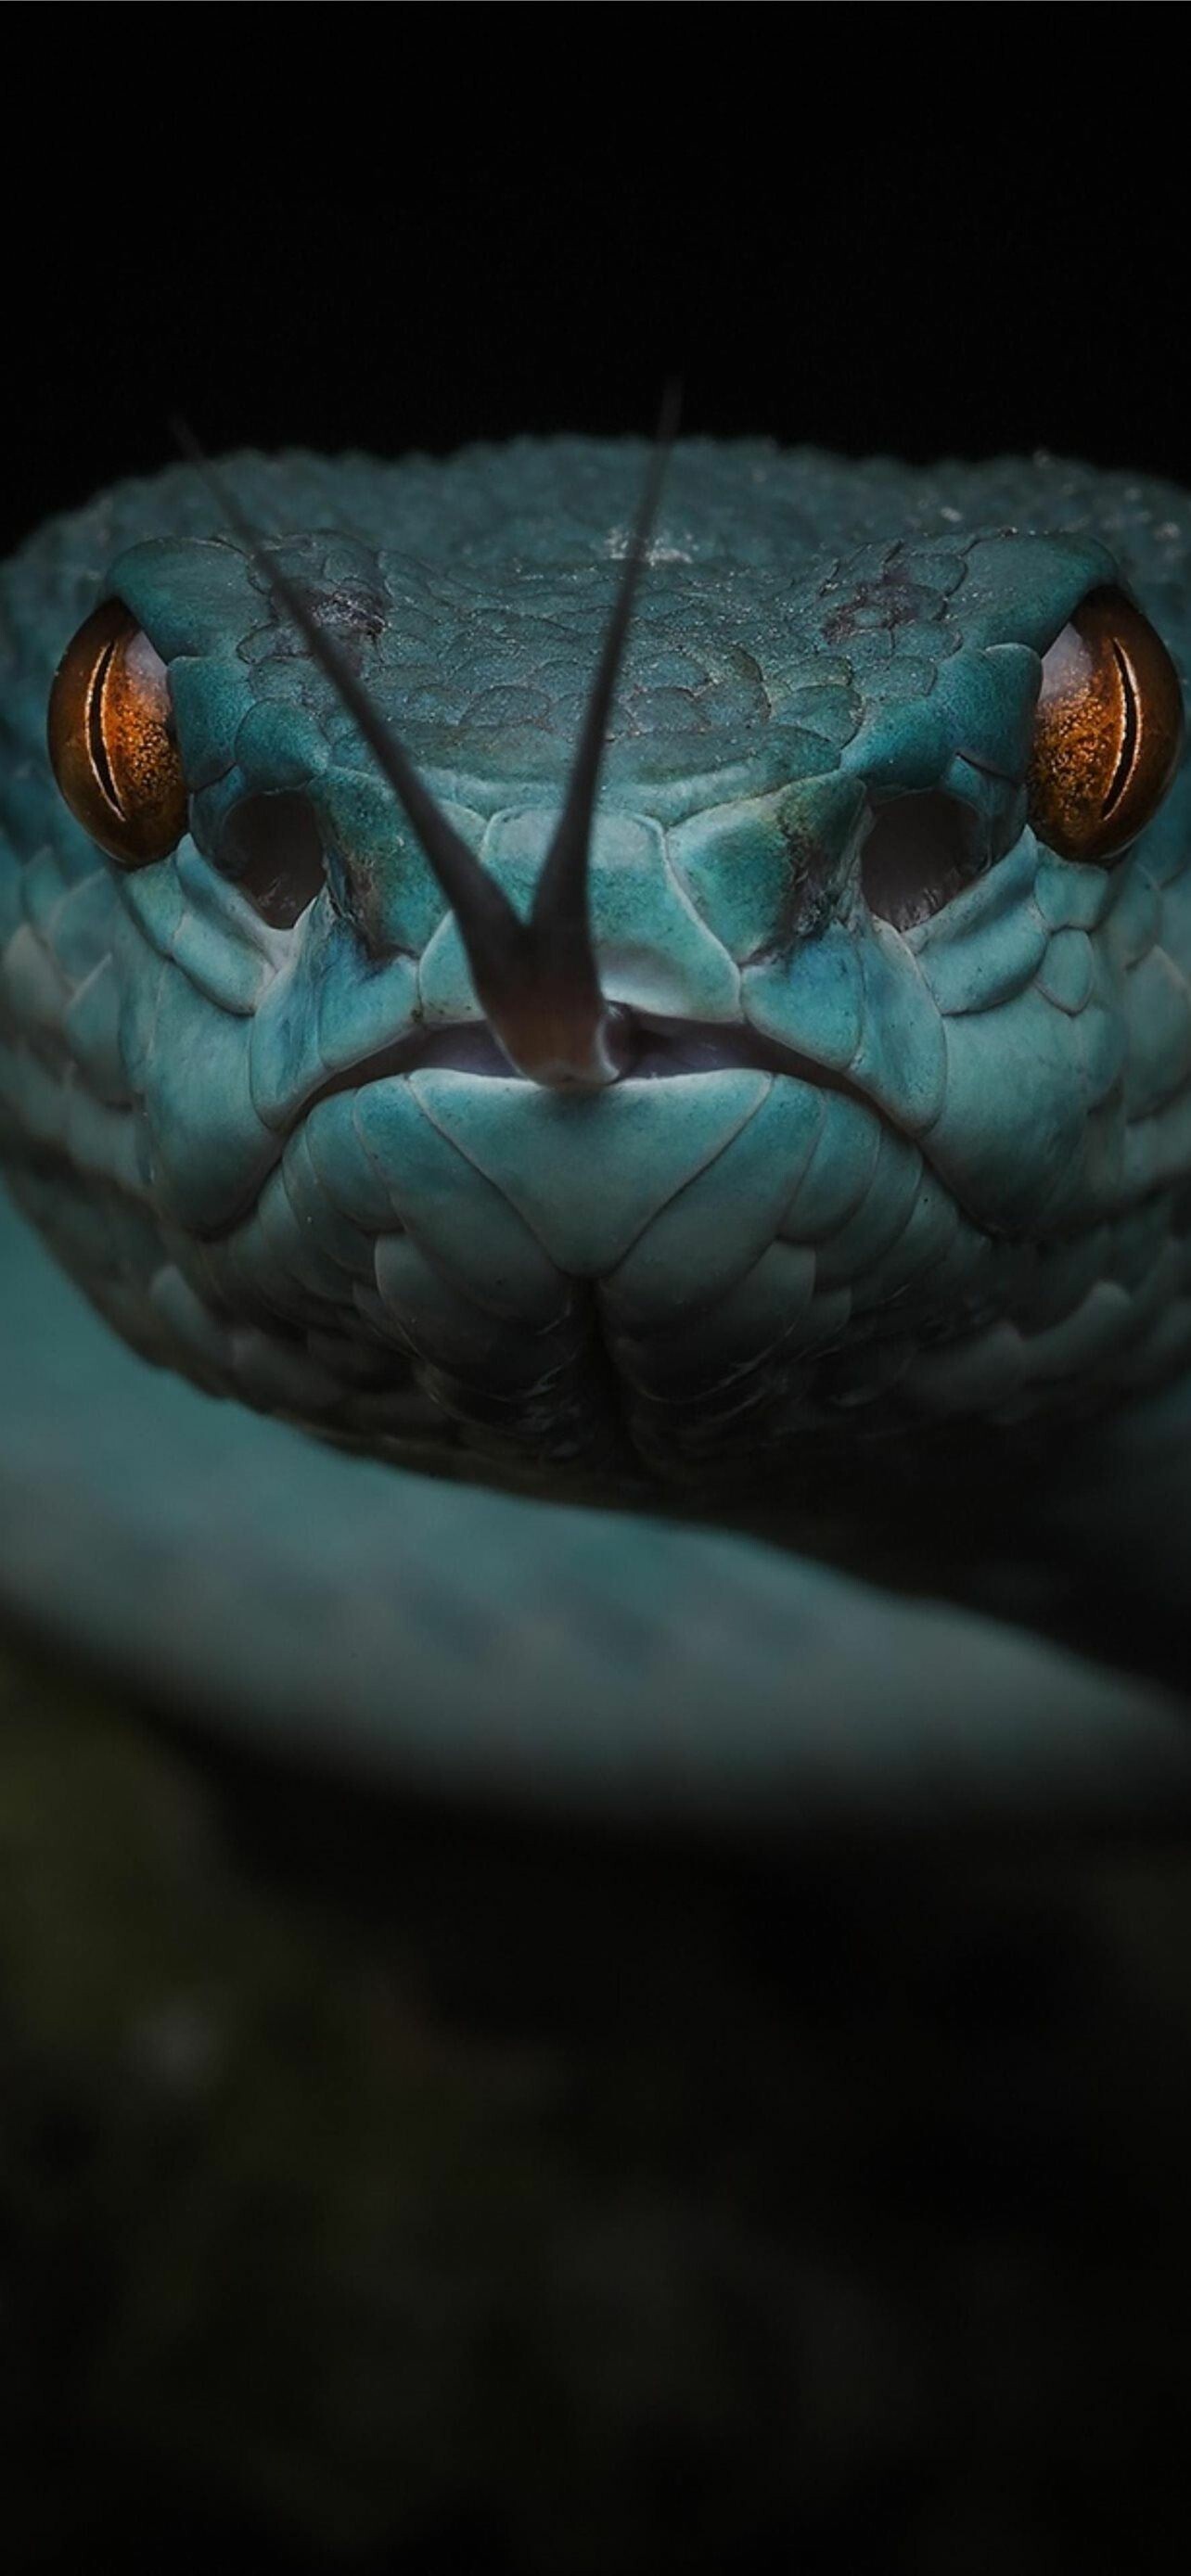 Snake: The fork in the tongue provides a sort of directional sense of smell and taste simultaneously. 1290x2780 HD Background.